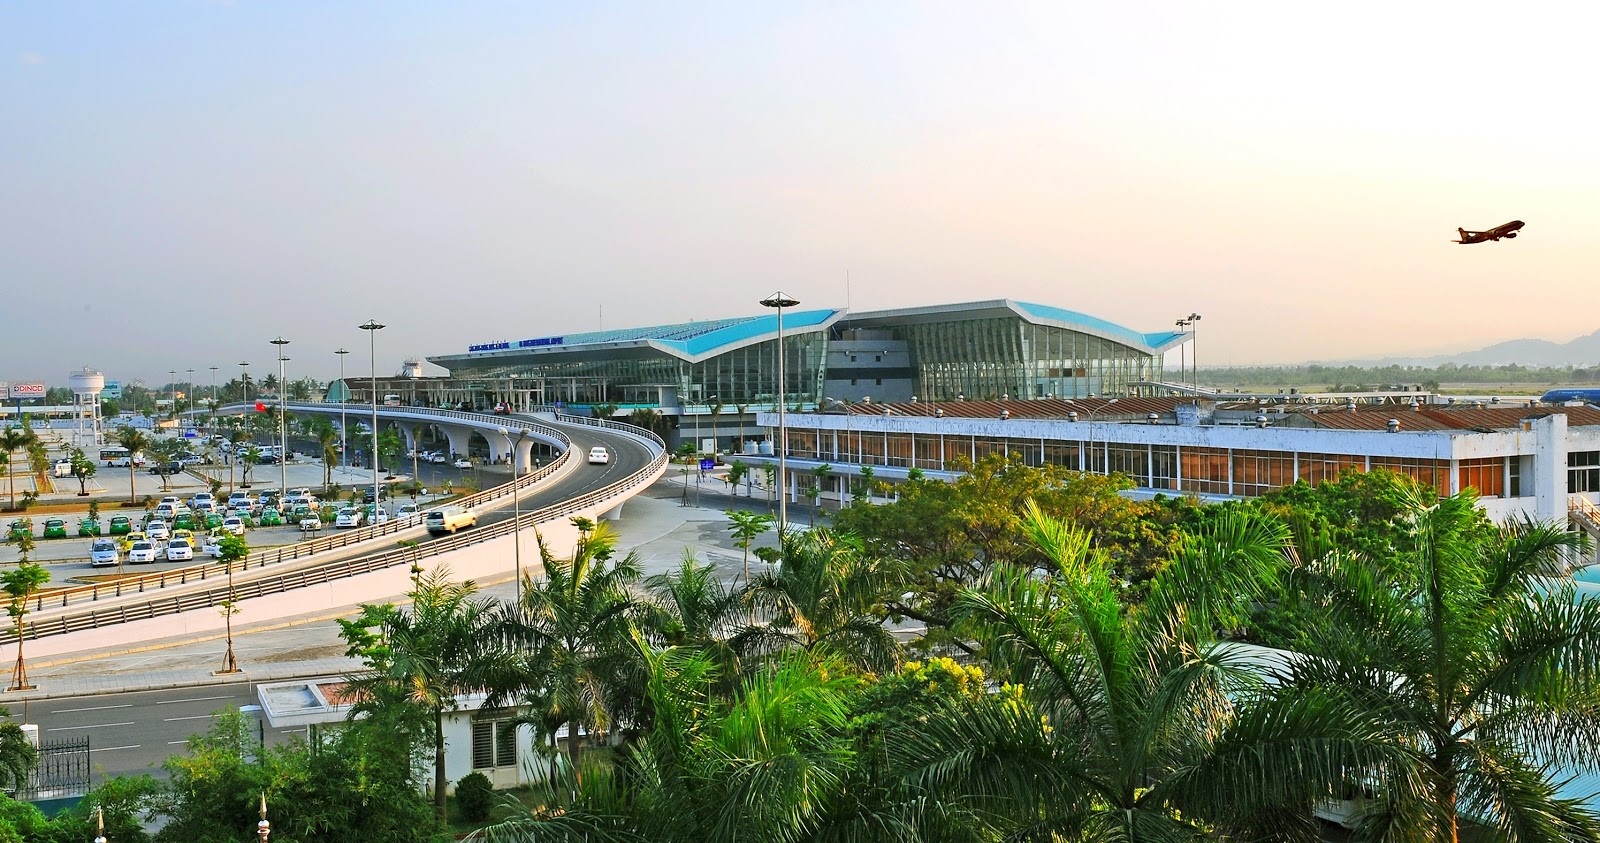 Da Nang Airport Allow Foreign Tourists To Enter Again From March 15, 2022 | Visa Application Guidance For Entry Vietnam Through Da Nang Airport (Da Nang City) 2022